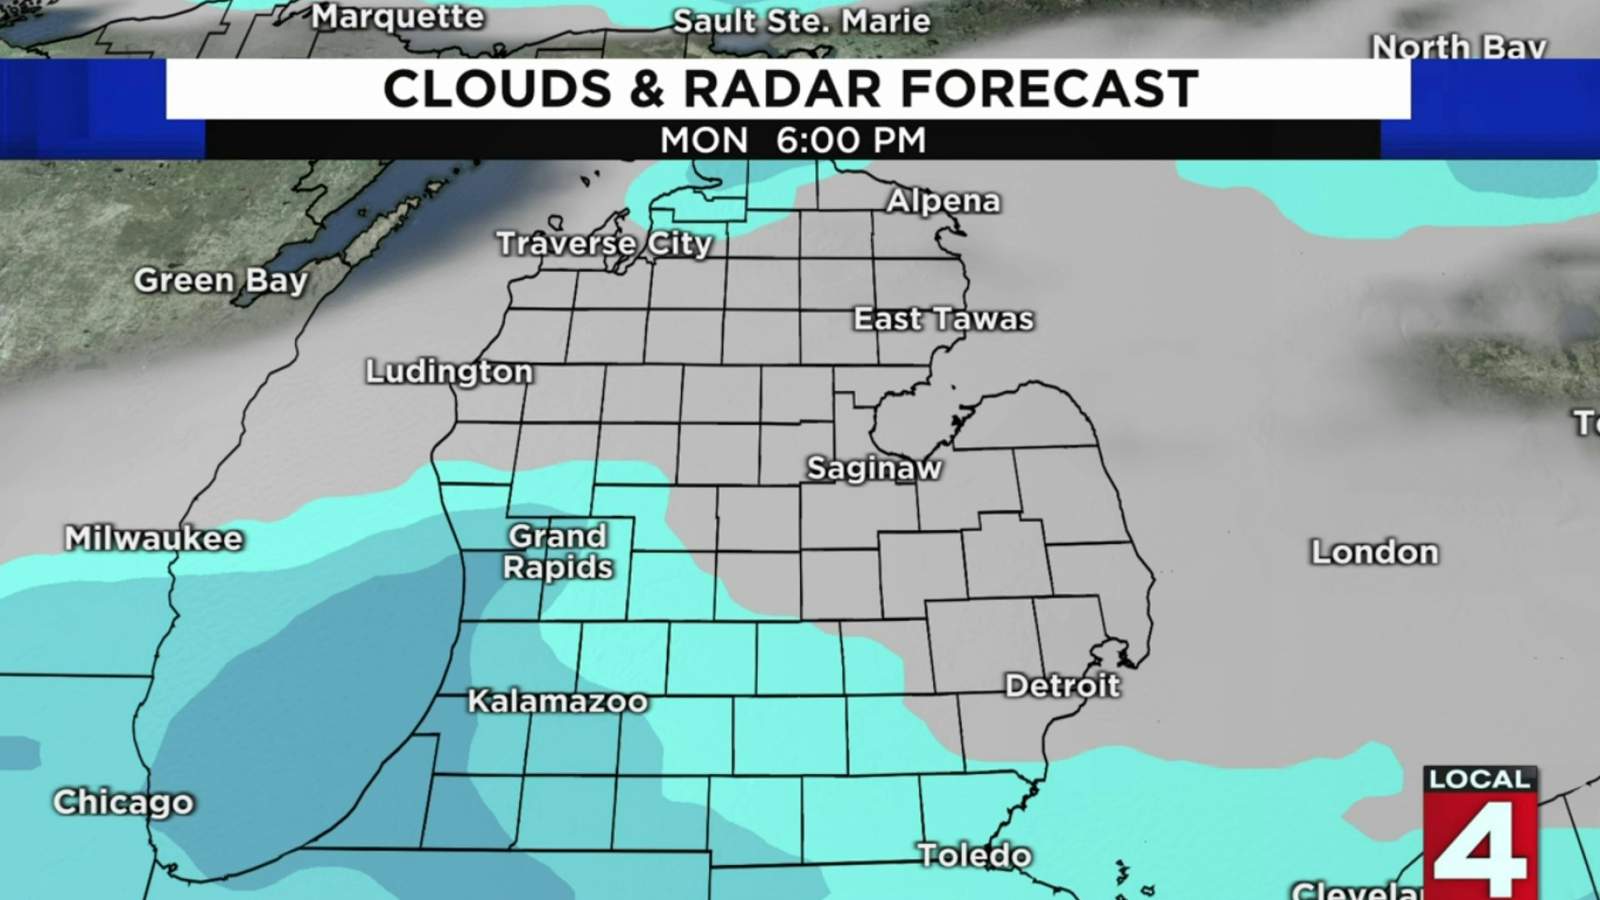 Metro Detroit weather: More snow flakes, more cold